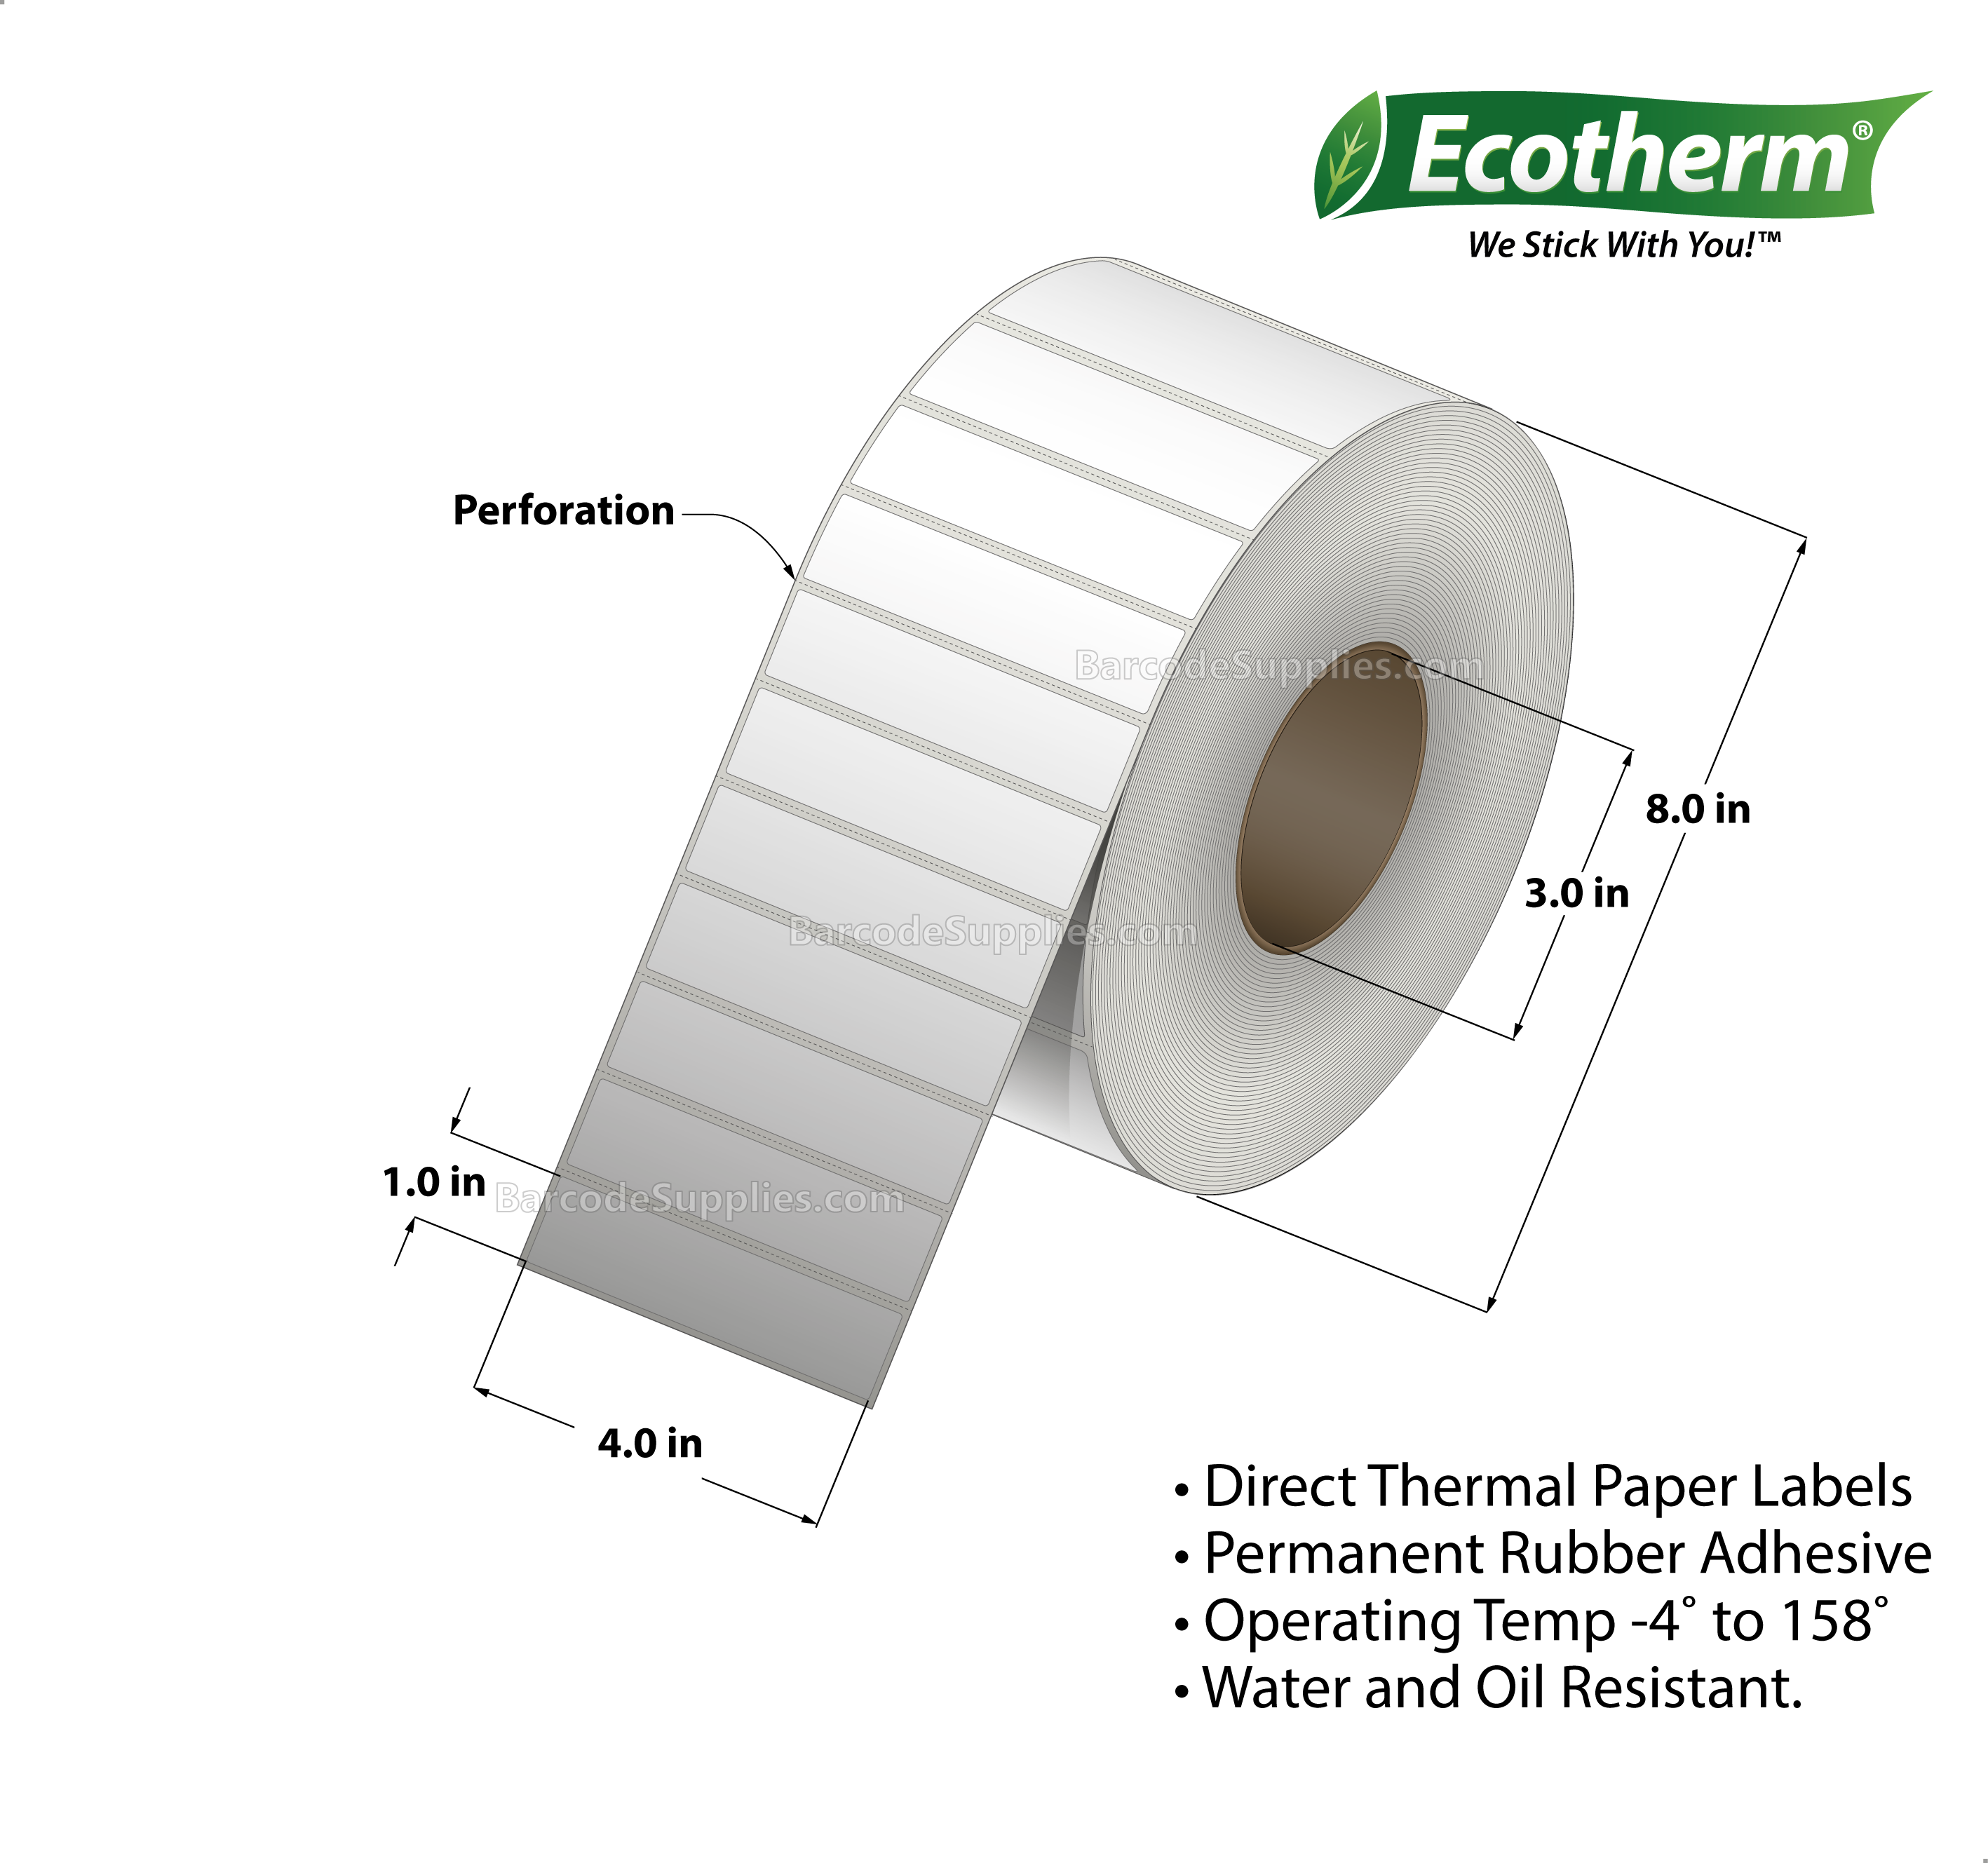 4 x 1 Direct Thermal White Labels With Rubber Adhesive - Perforated - 5600 Labels Per Roll - Carton Of 1 Rolls - 5600 Labels Total - MPN: ECOTHERM18117-1